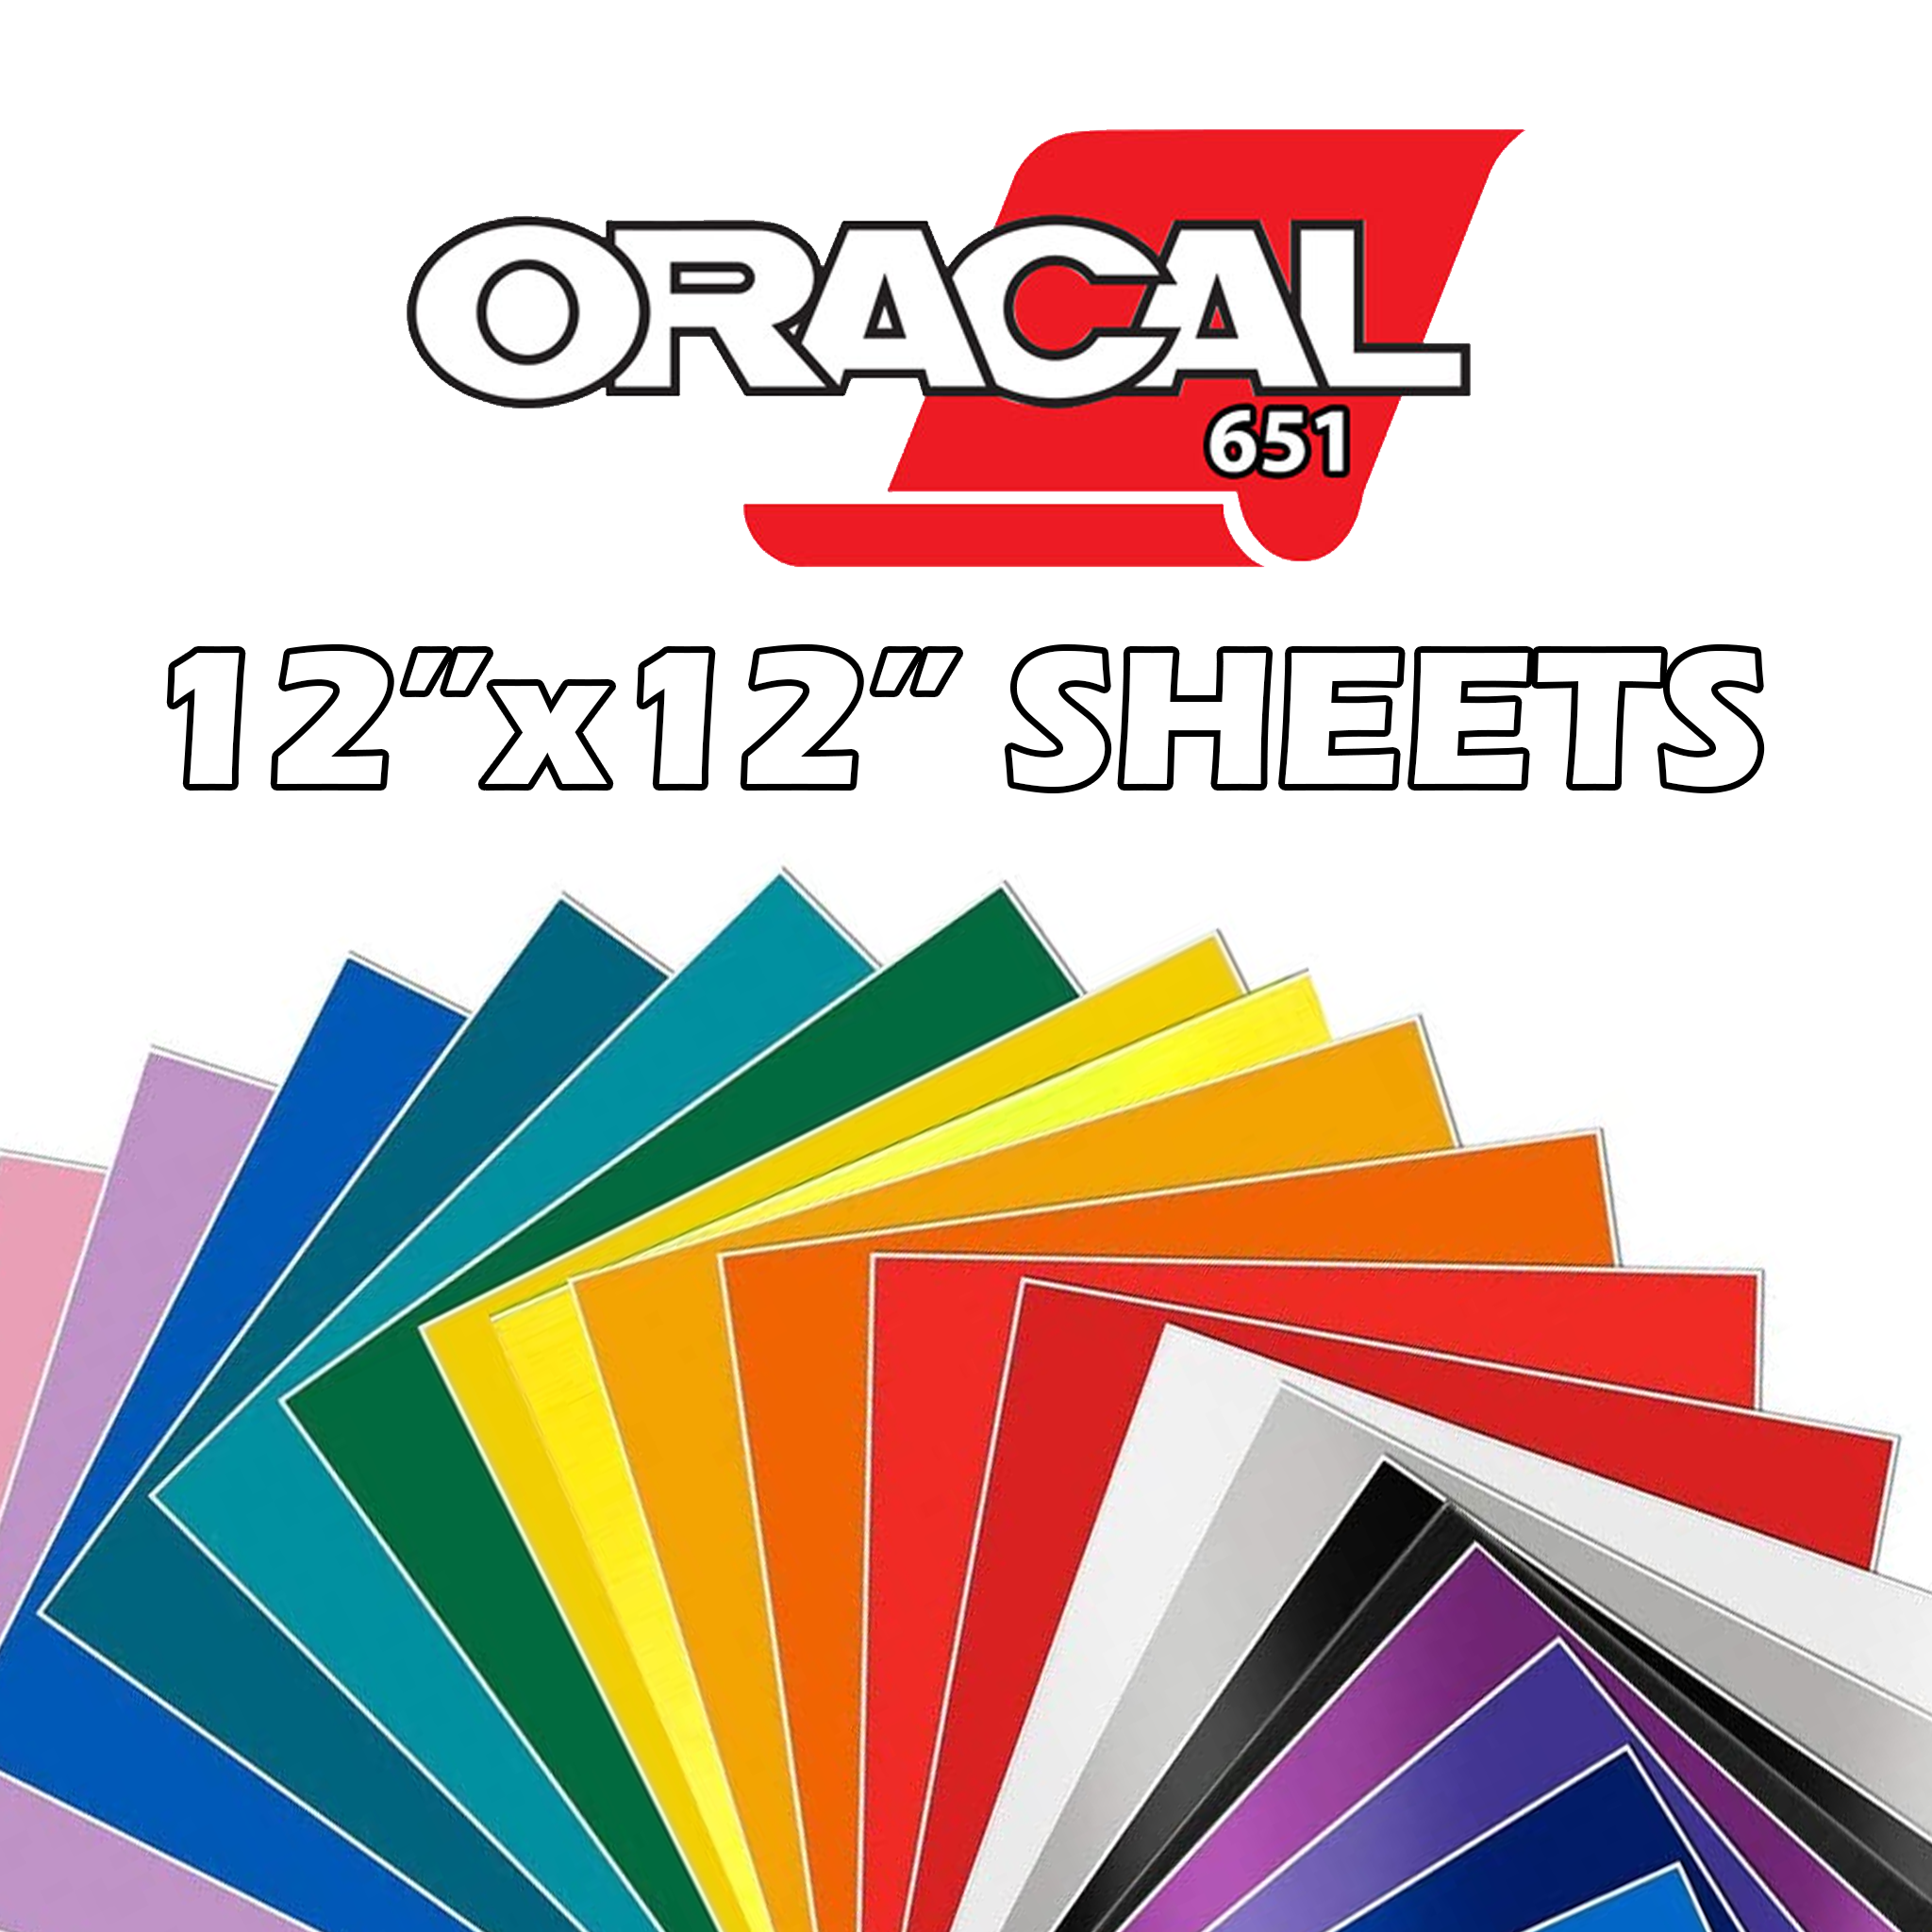 Oracal 651 Adhesive 12" x 12" Sheets